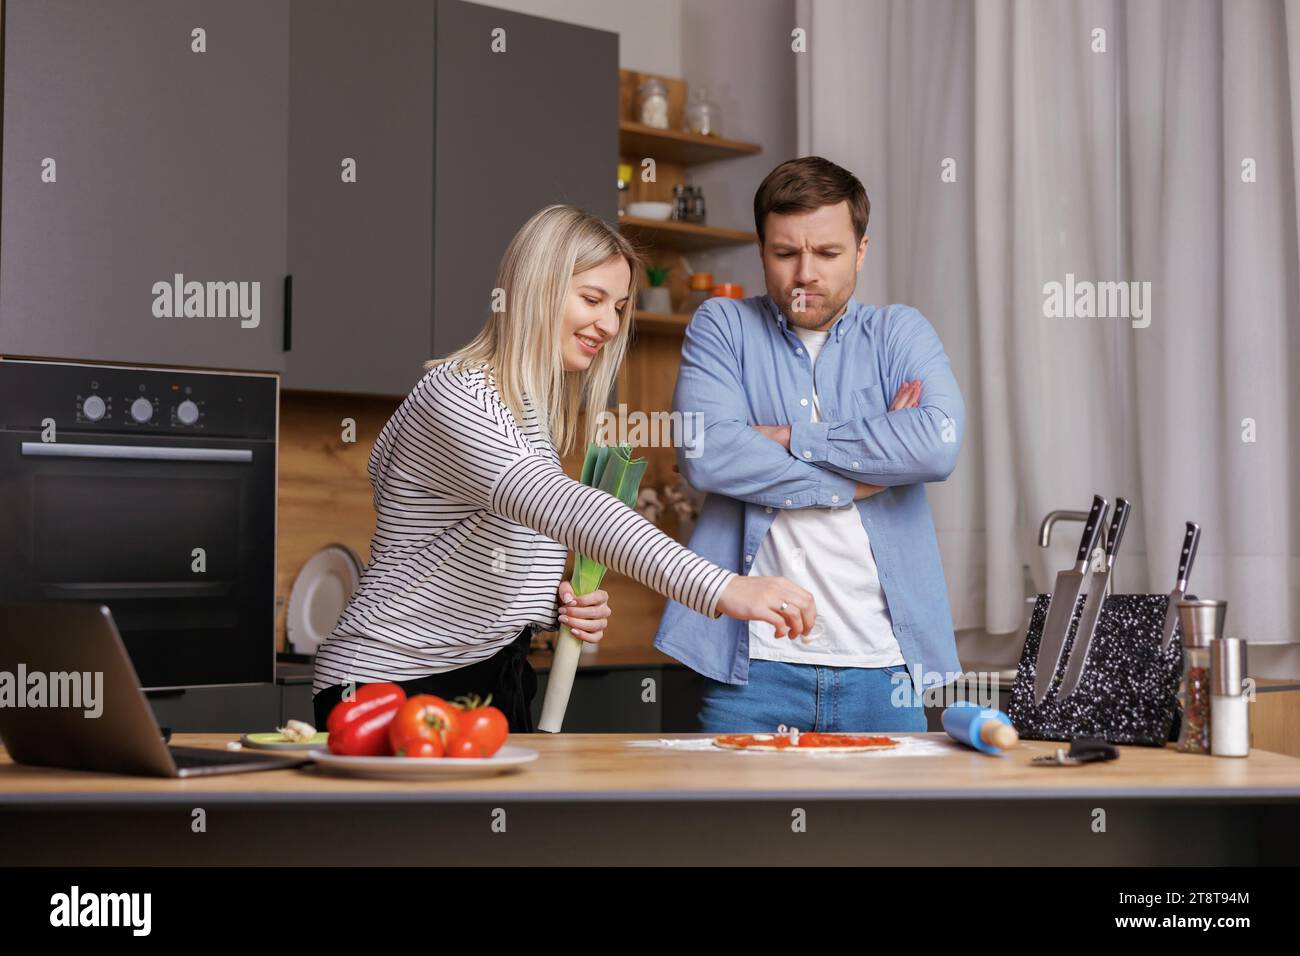 Leave Me Alone. A woman is preparing food, and a man is talking to her, and is not satisfied with the way she is cooking Stock Photo